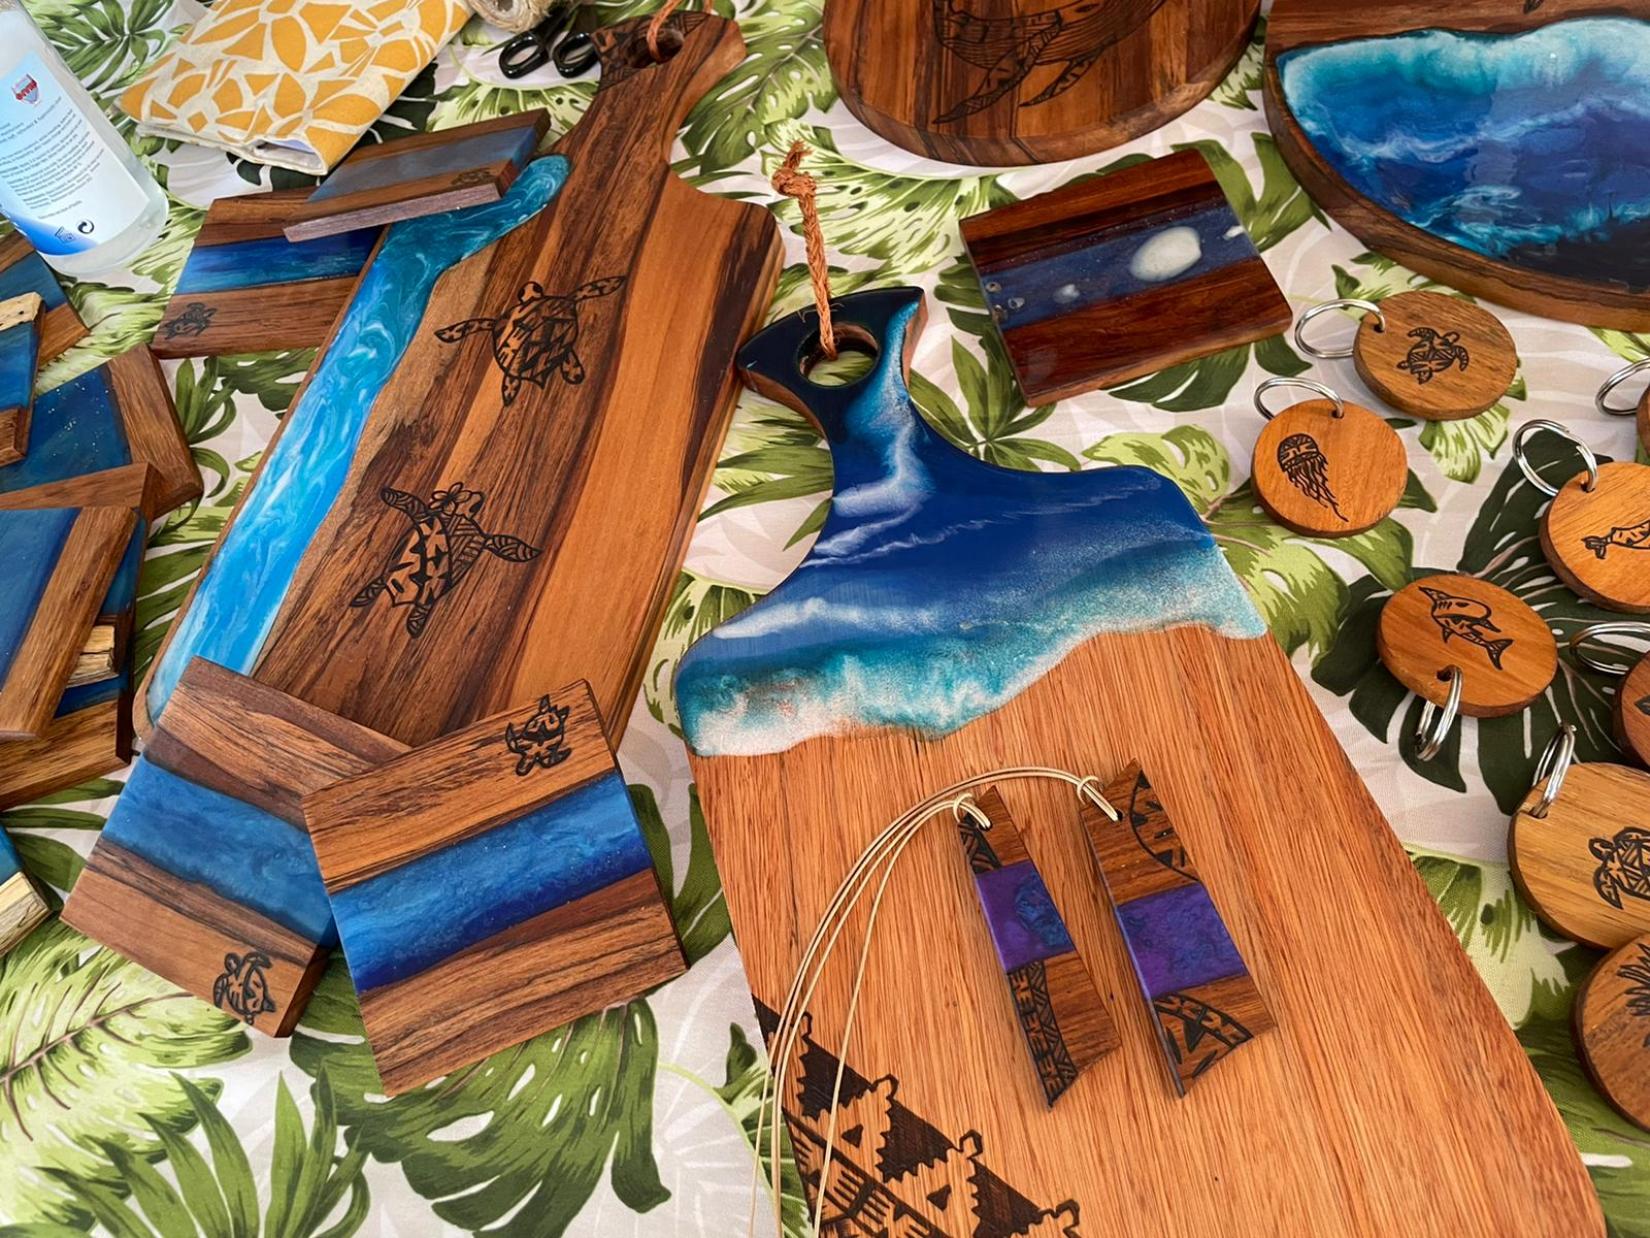 Caption: The talented Crissy Pickering's handmade wooden handicrafts were a crowd favourite at the 'mini market' day in Suva, Fiji.